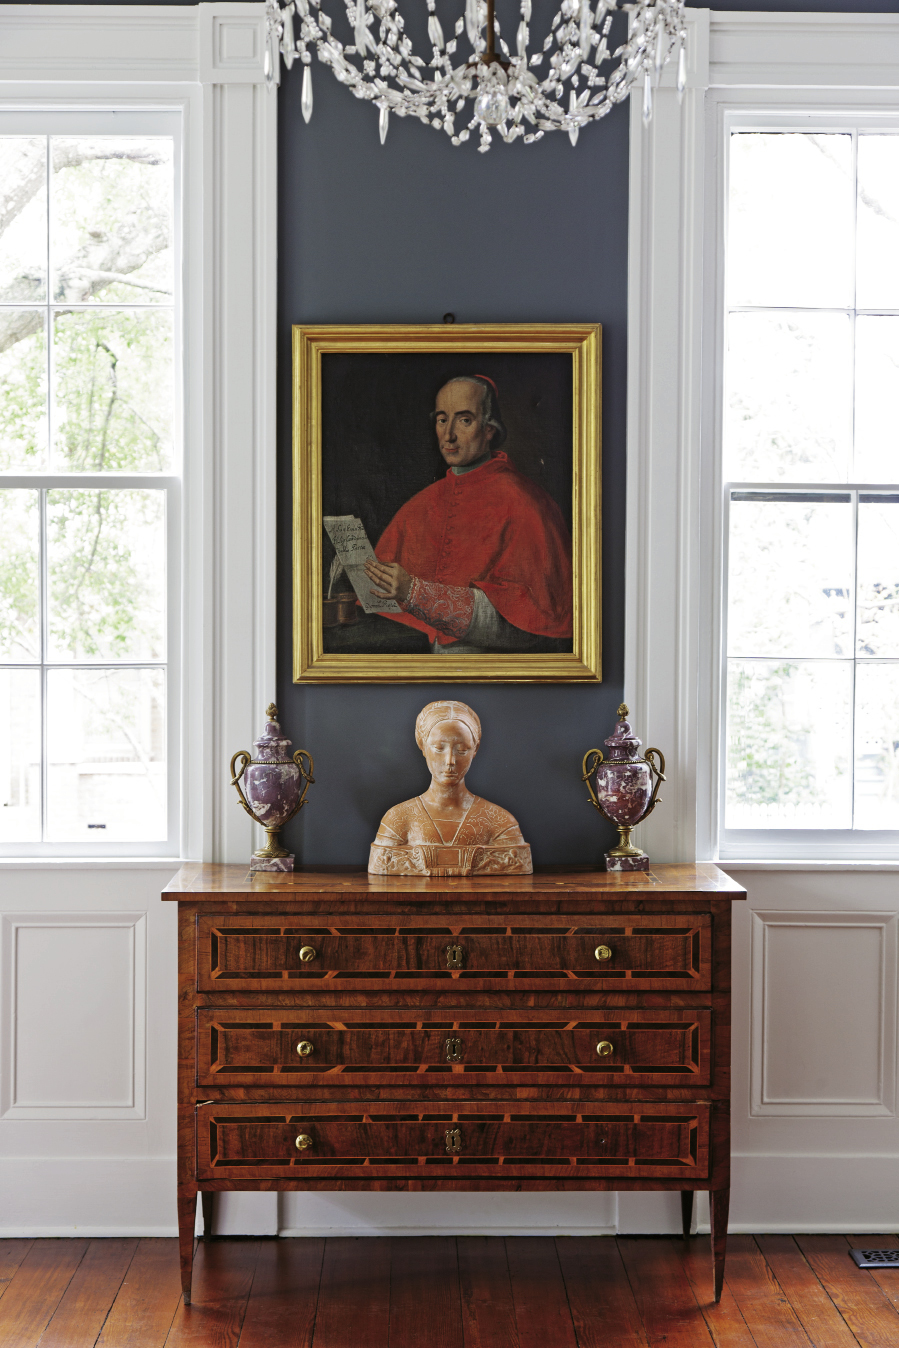 A 16th-century portrait of Cardinal Ardicinus della Porta hangs over a bust of an Italian princess in the front parlor